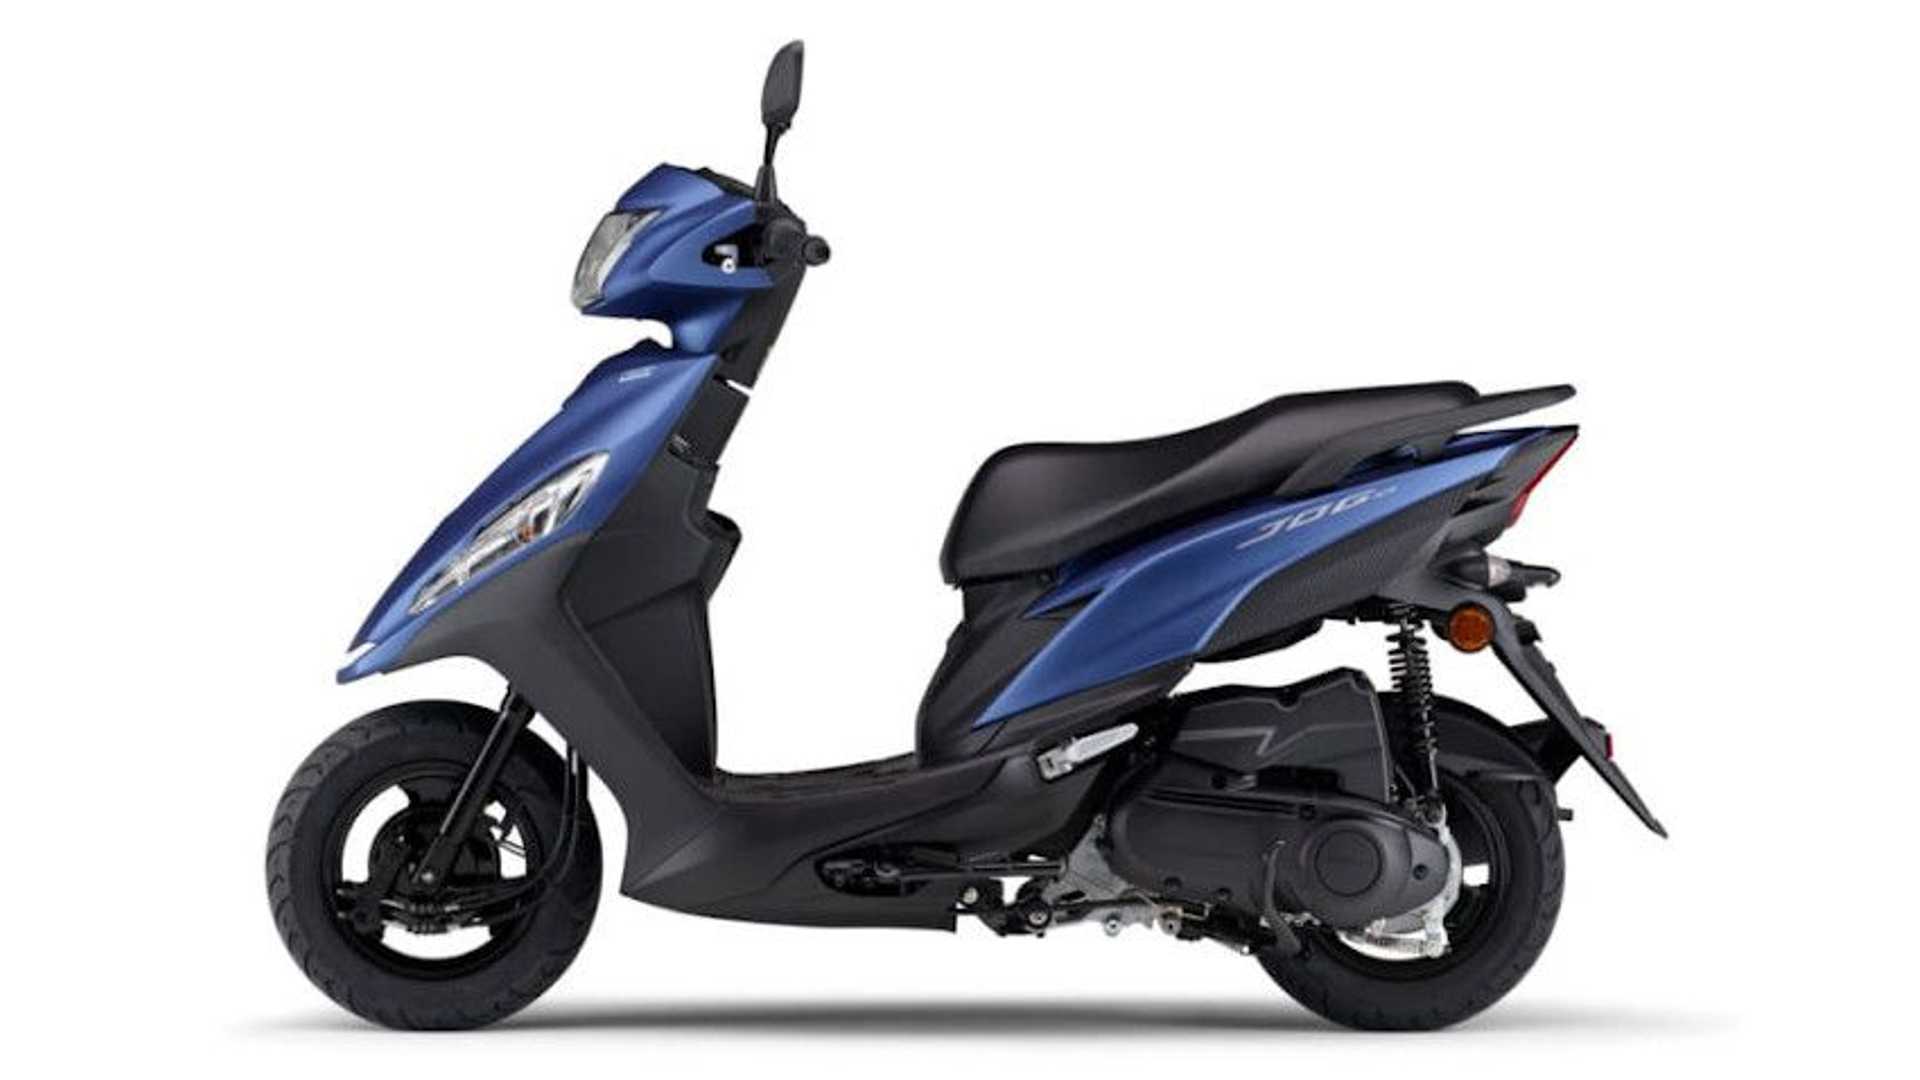 Yamaha Jog 125 Scooter Launch Japan - RM7.1k - Motorcycle news, Motorcycle reviews from Malaysia, Asia and the world - BikesRepublic.com